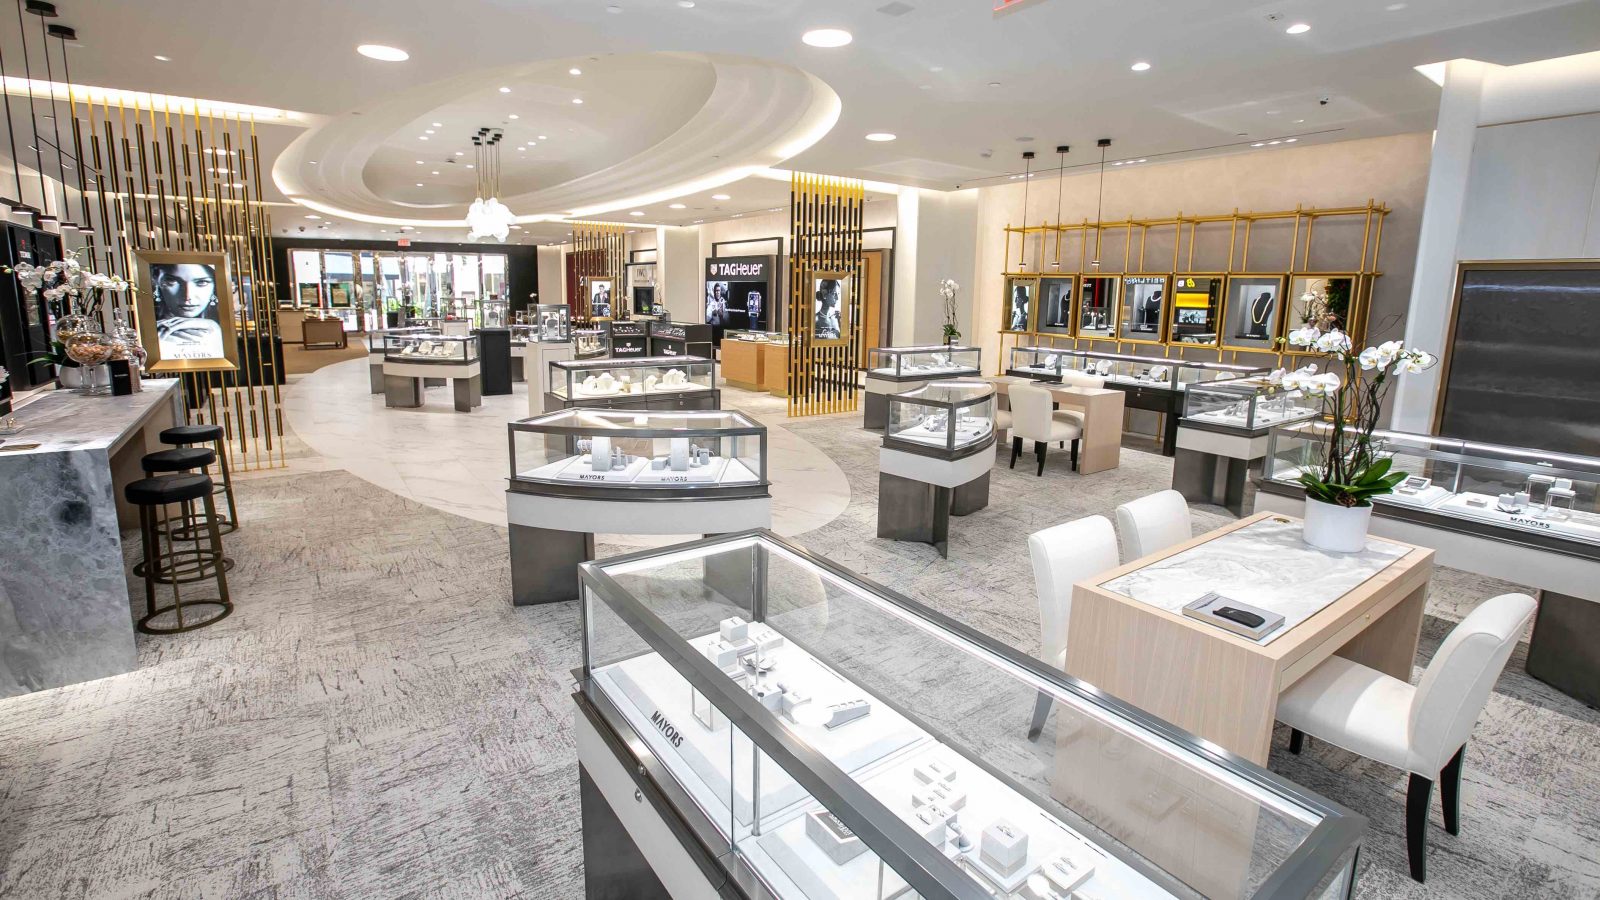 Mayors opens first flagship in Atlanta at Lenox Square as part of the  retailer's relaunch - News & Media - The Watches of Switzerland Group